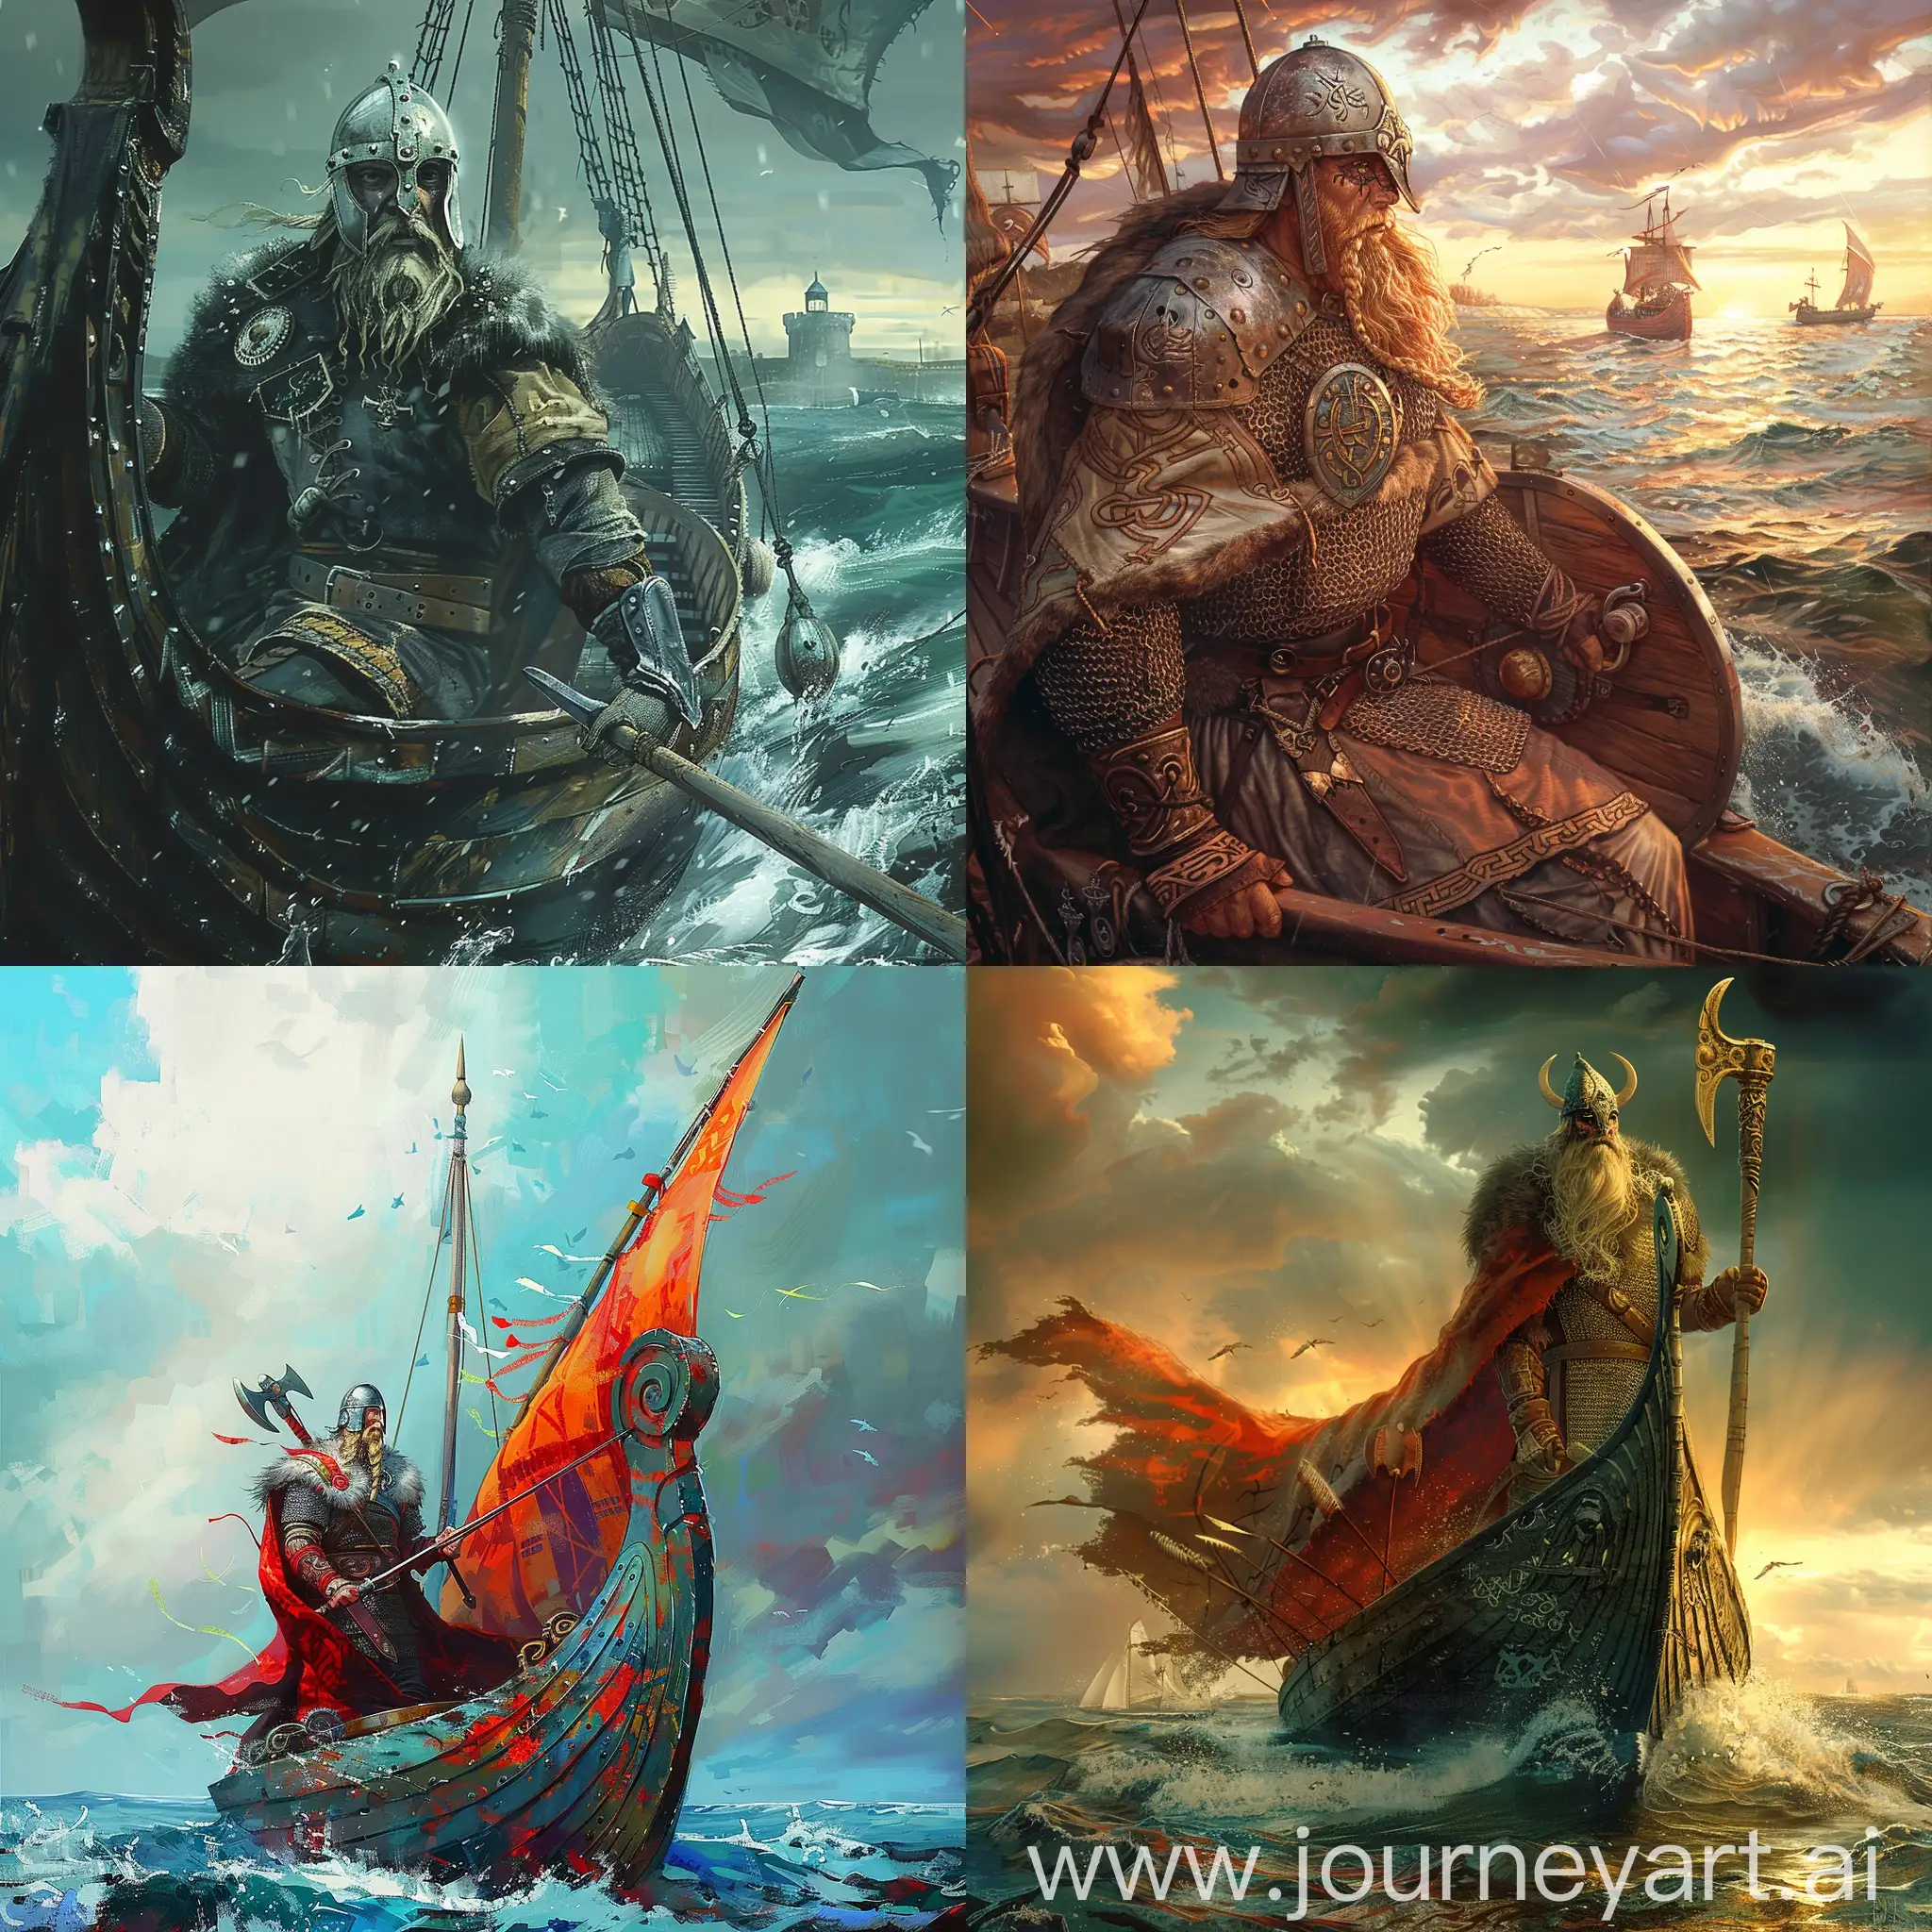 Moebius style image of A Viking warrior in a ship, Baltic Sea, art, hd